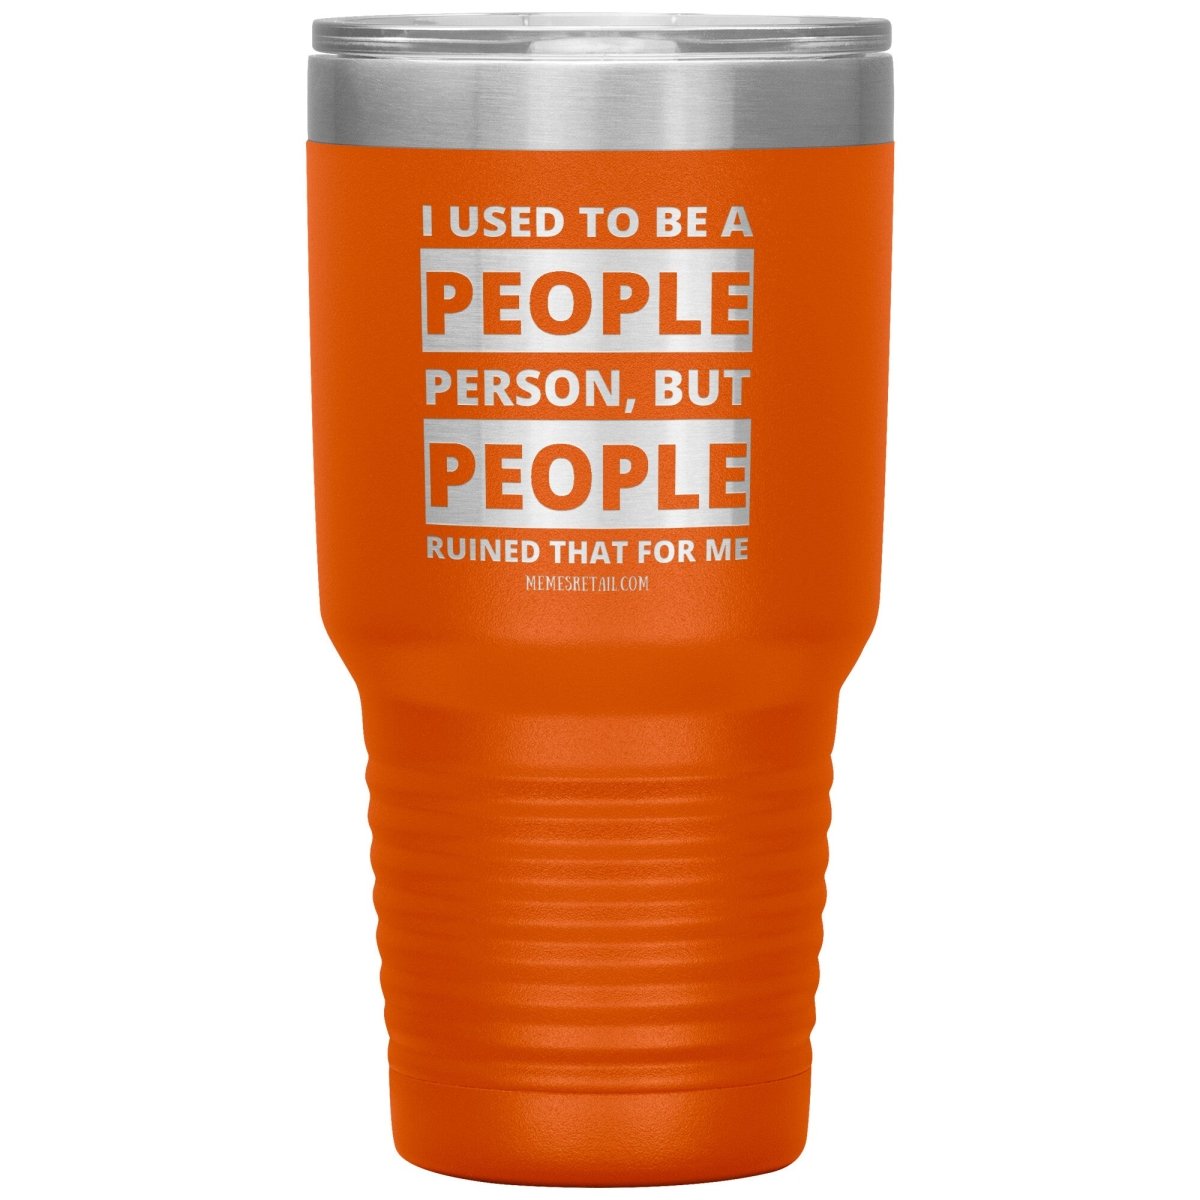 I Used To Be A People Person, But People Ruined That For Me Tumblers, 30oz Insulated Tumbler / Orange - MemesRetail.com